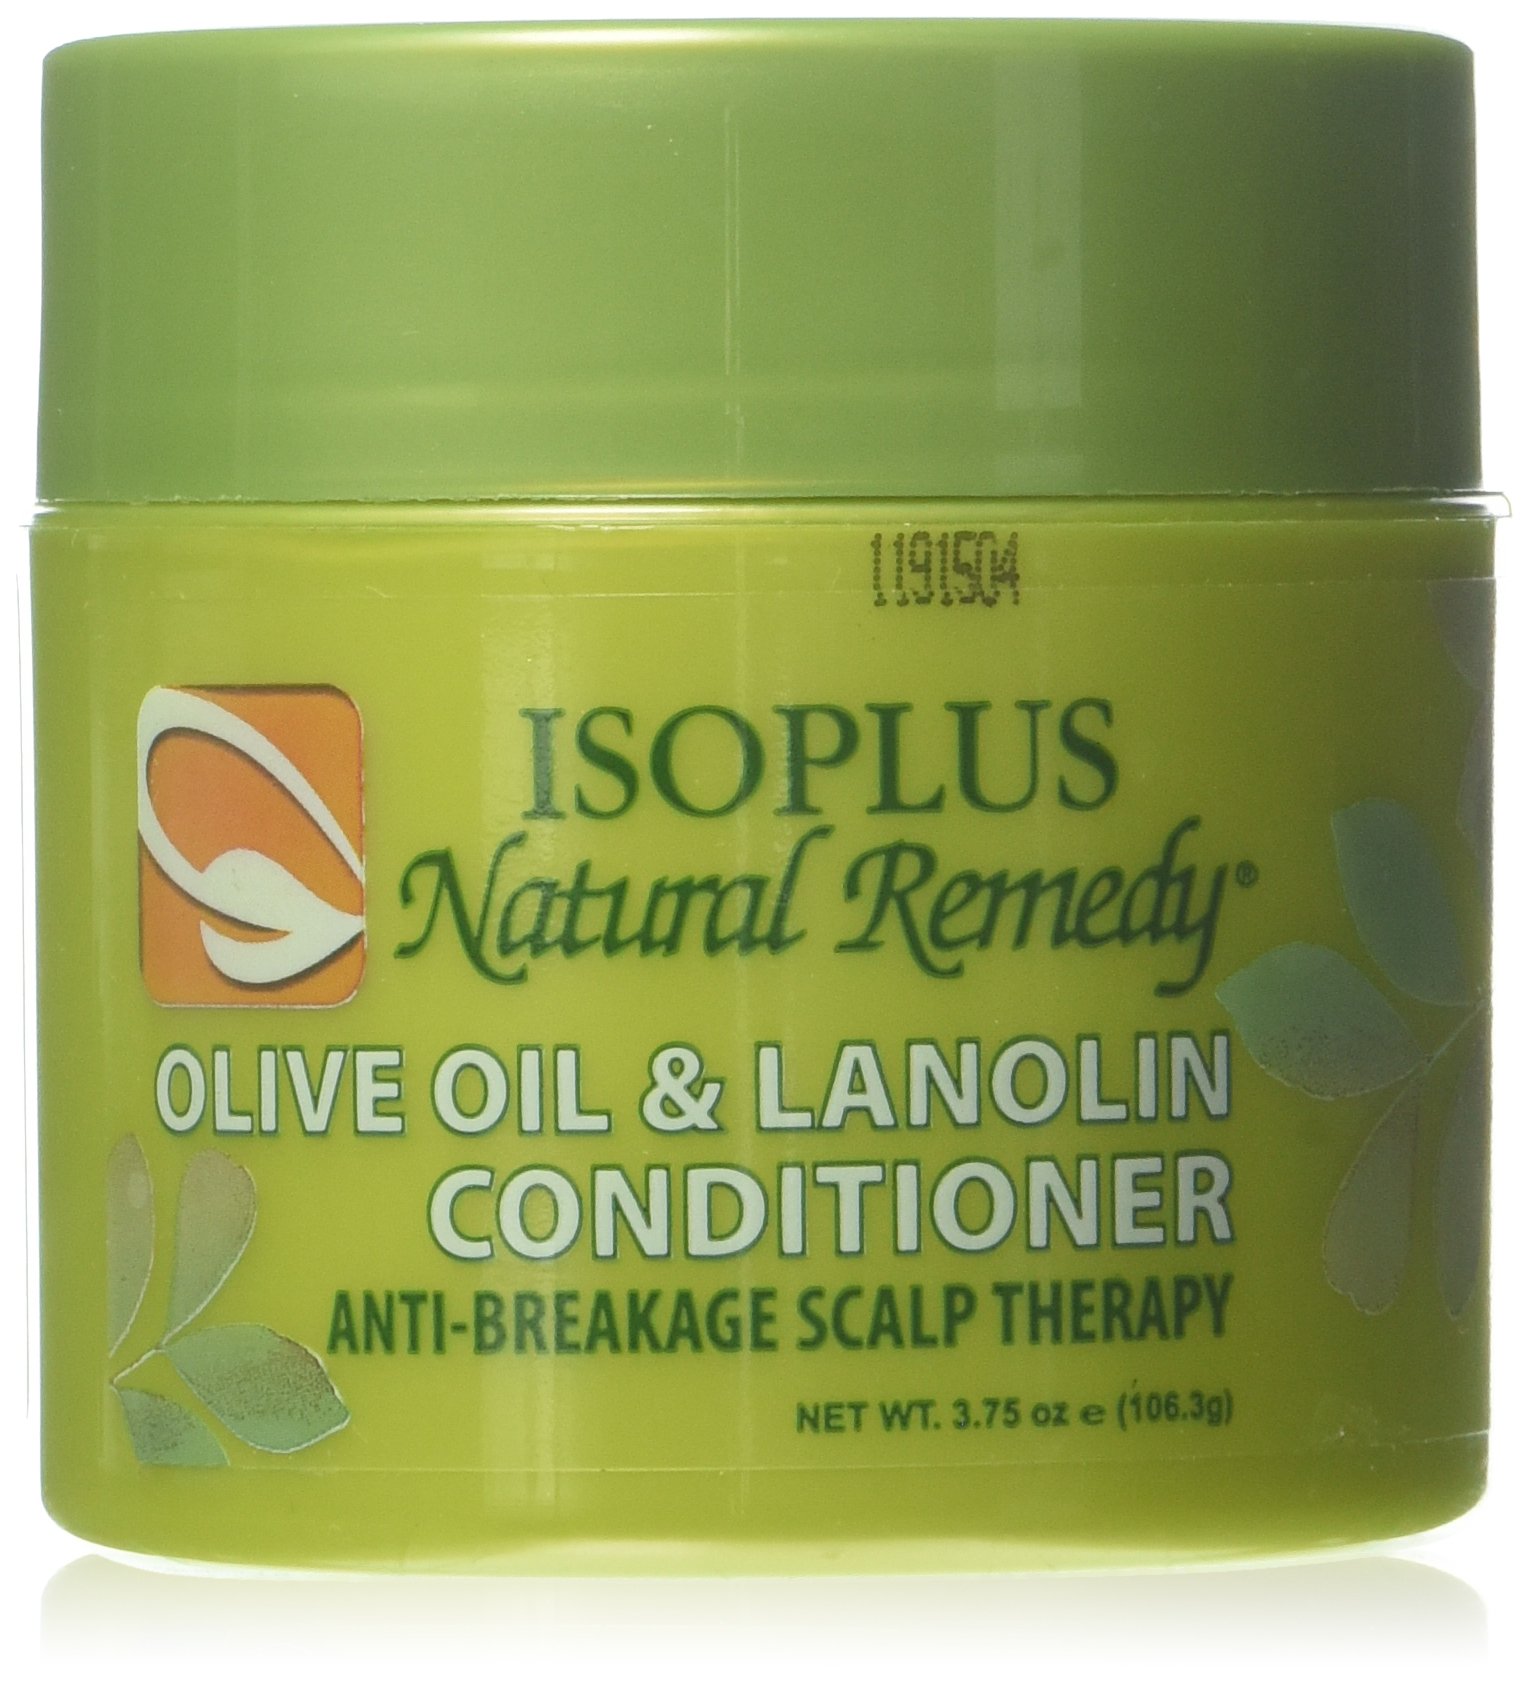 Isoplus Natural Remedy Olive Oil/Lanolin Conditioner 3.75 Oz